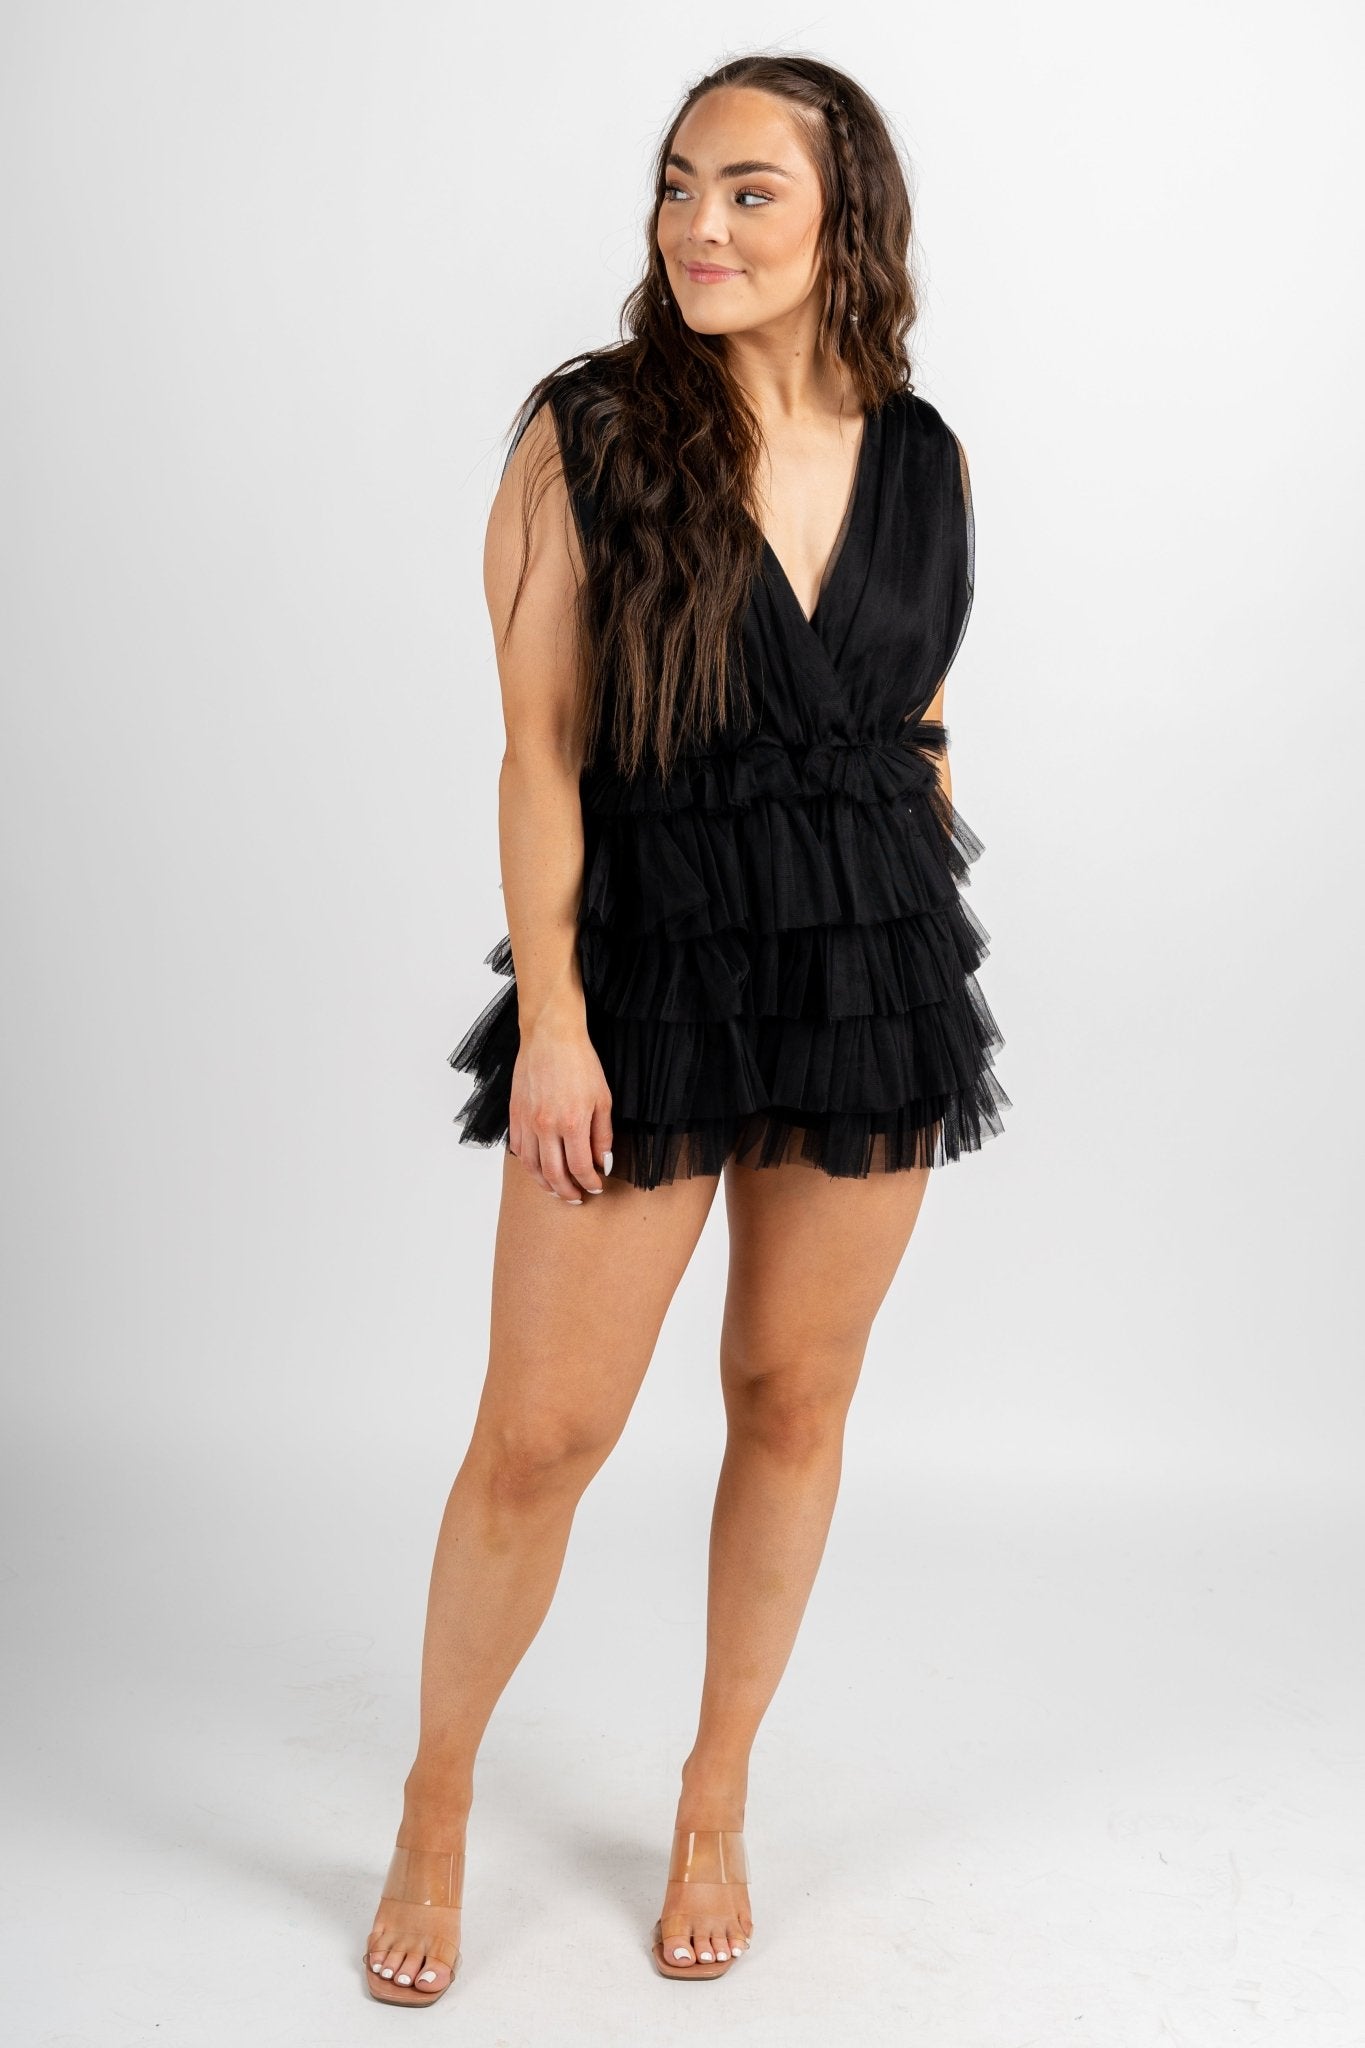 Tulle deep v romper black Stylish Romper - Womens Fashion Rompers & Pantsuits at Lush Fashion Lounge Boutique in Oklahoma City